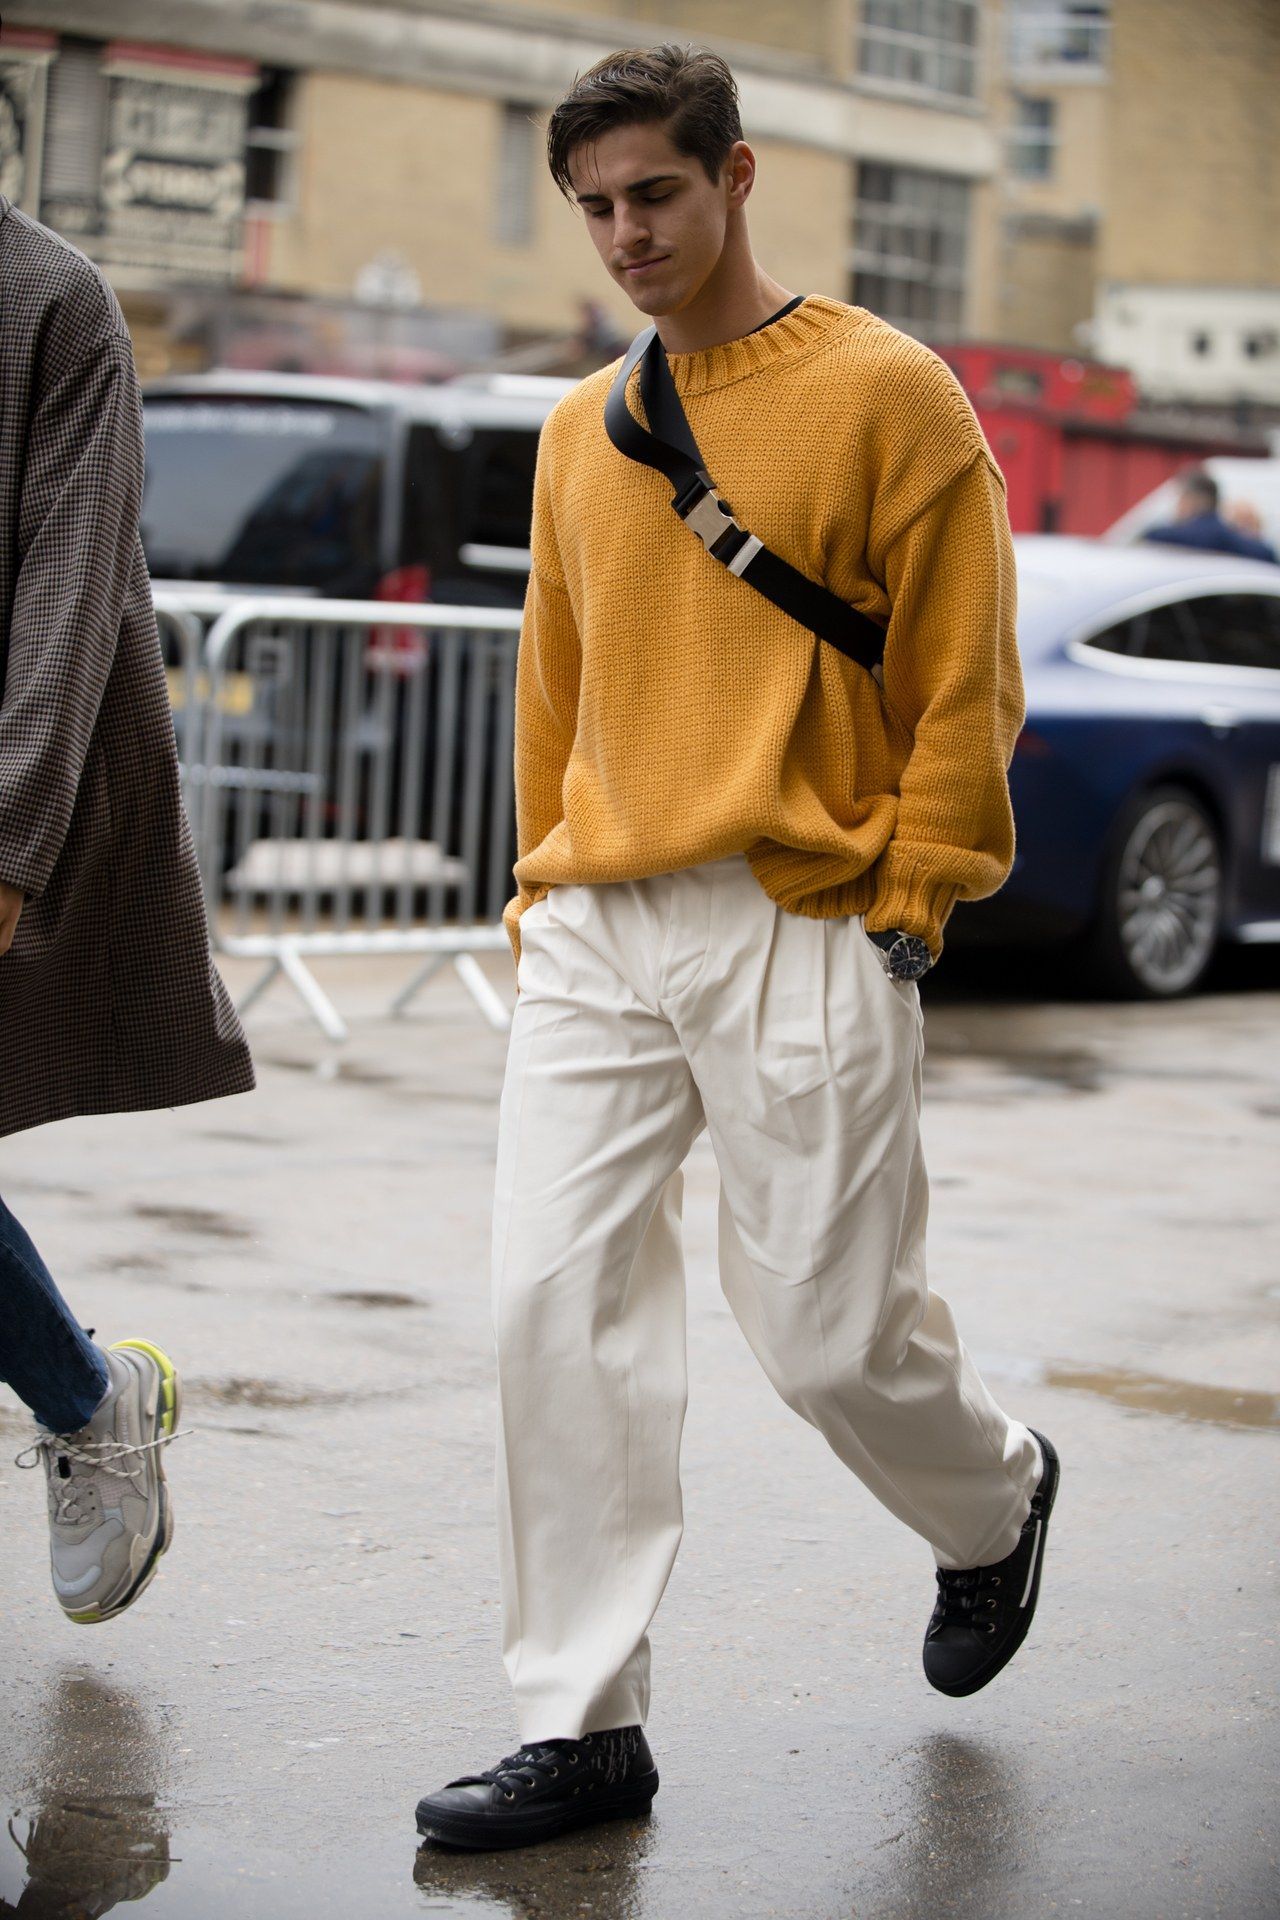 The most stand-out street style from London Fashion Week Men's SS20 - The most stand-out street style from London Fashion Week Men's SS20 -   19 style Fashion men ideas